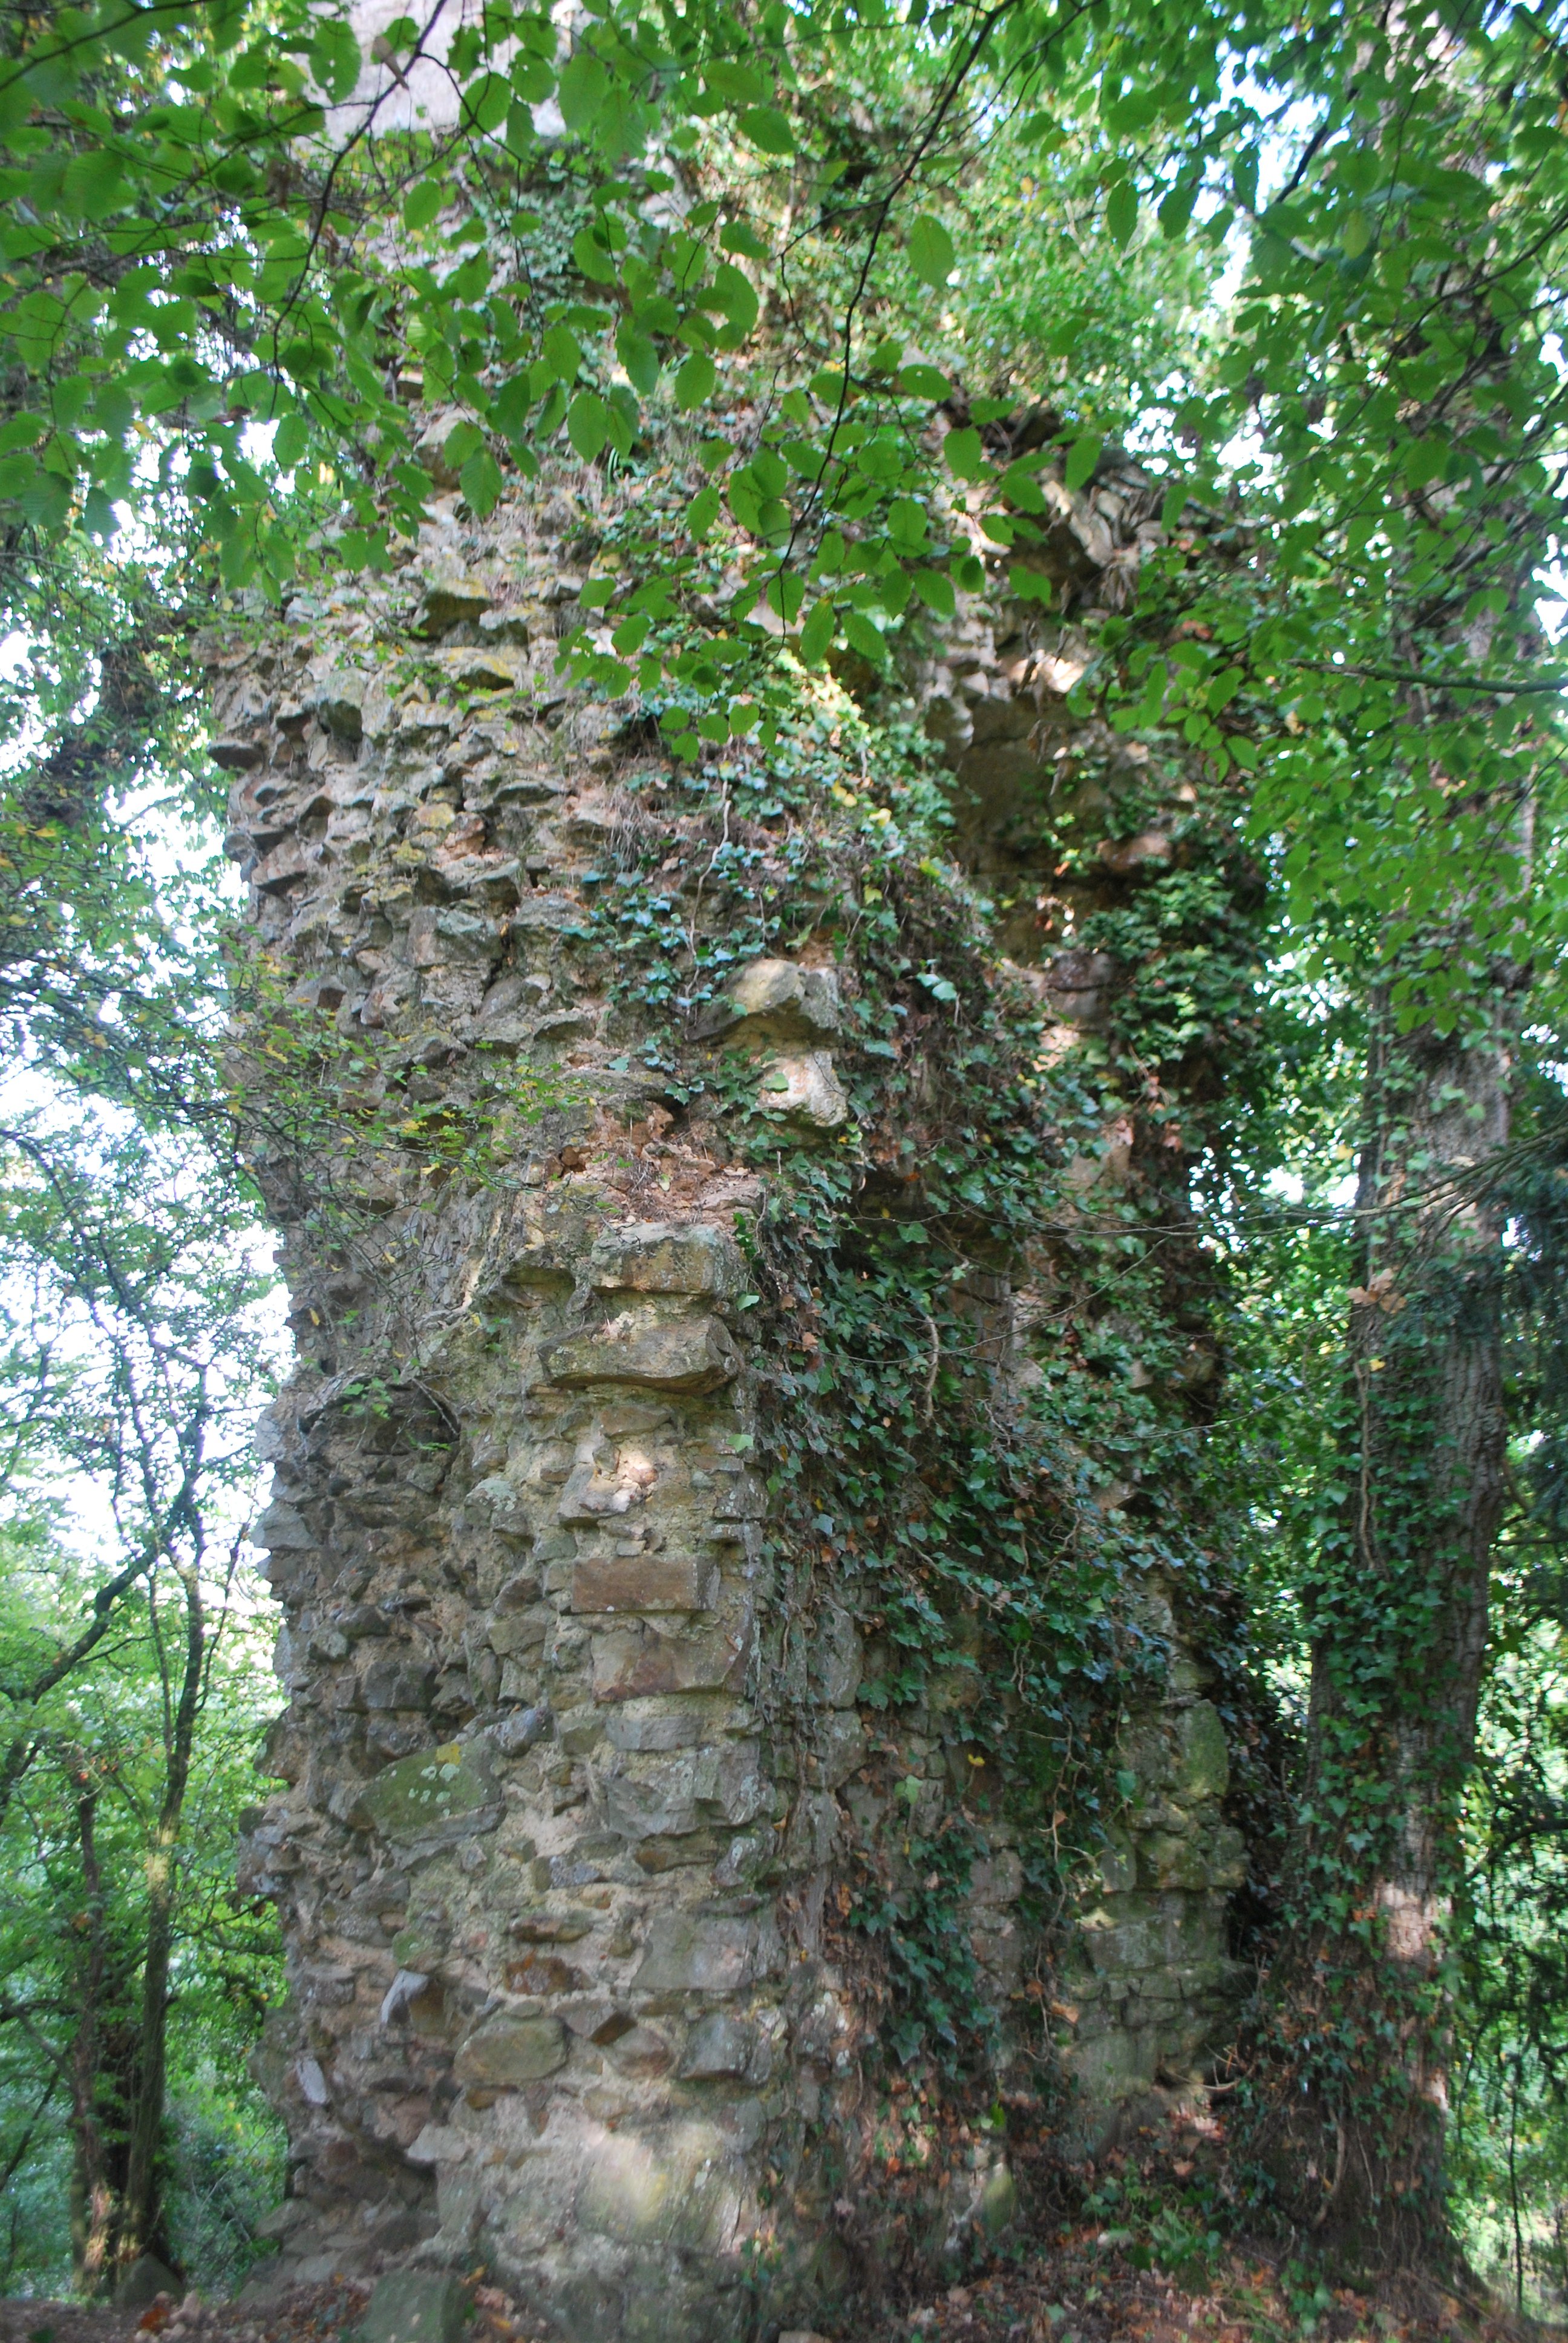 Remnant of a tall medieval wall (maybe 10 meters tall?) between trees